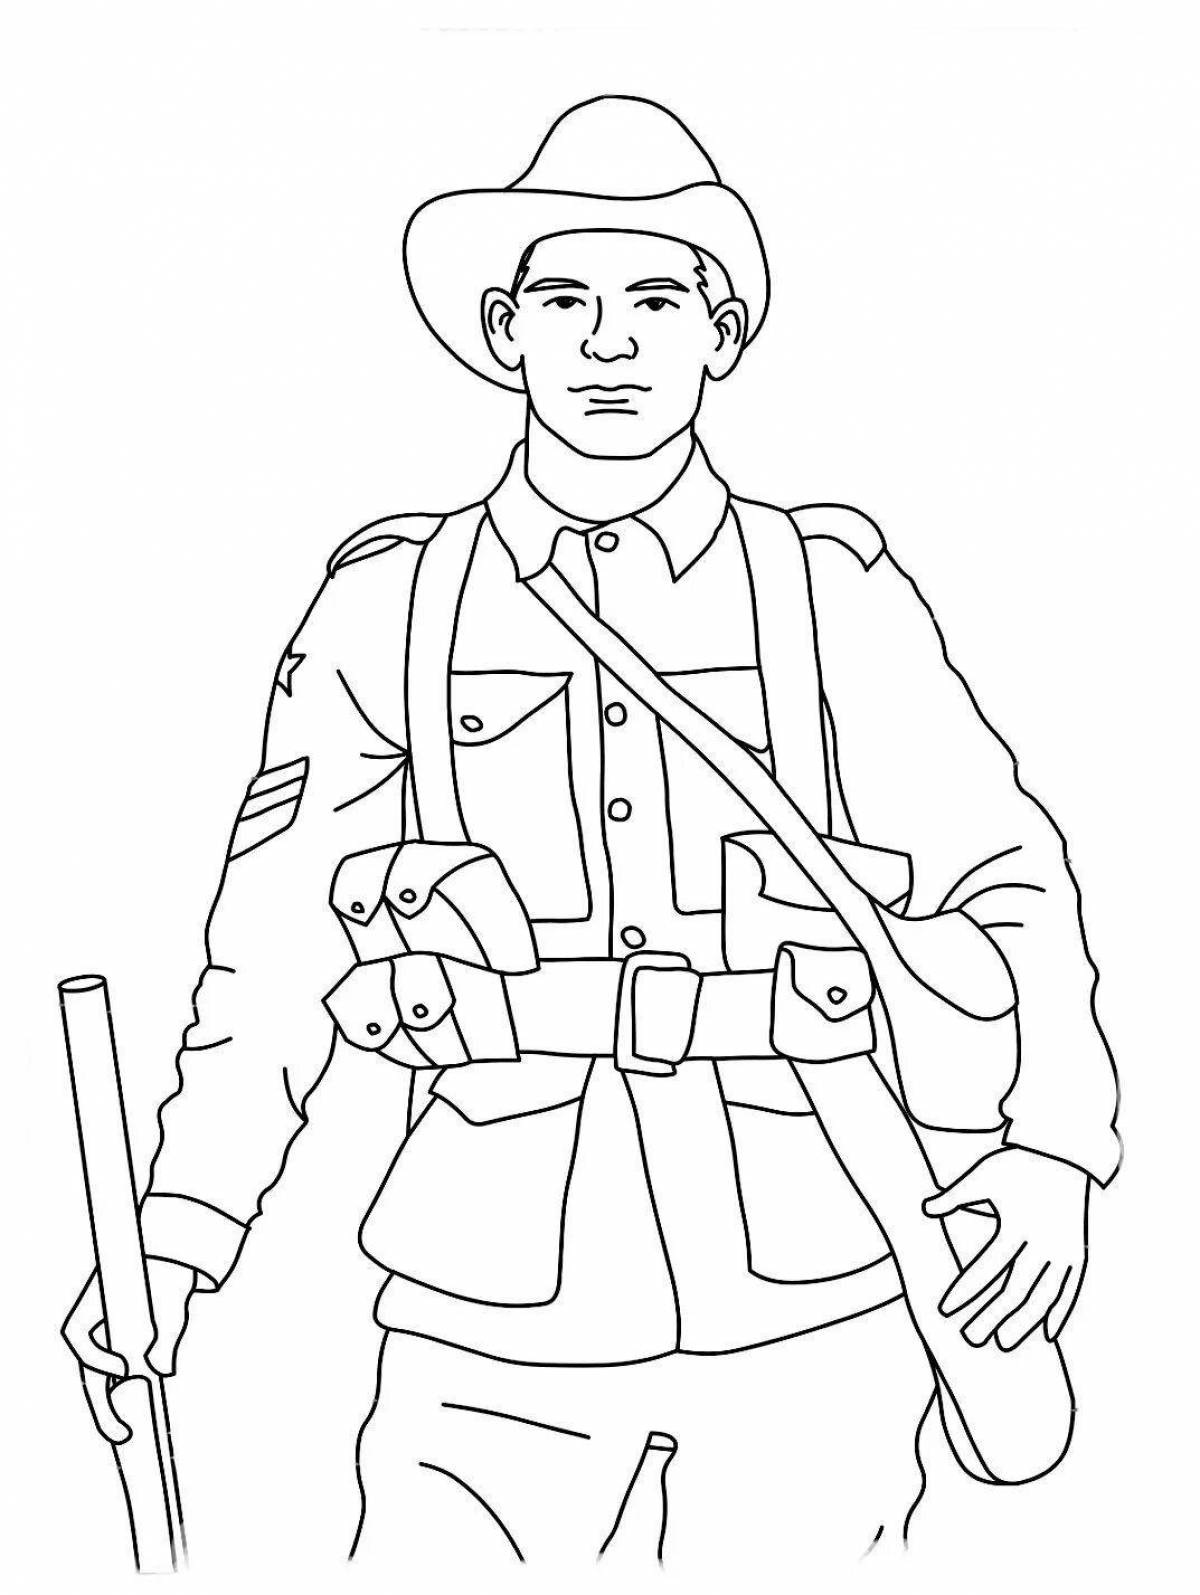 Adorable military coloring pages for kids